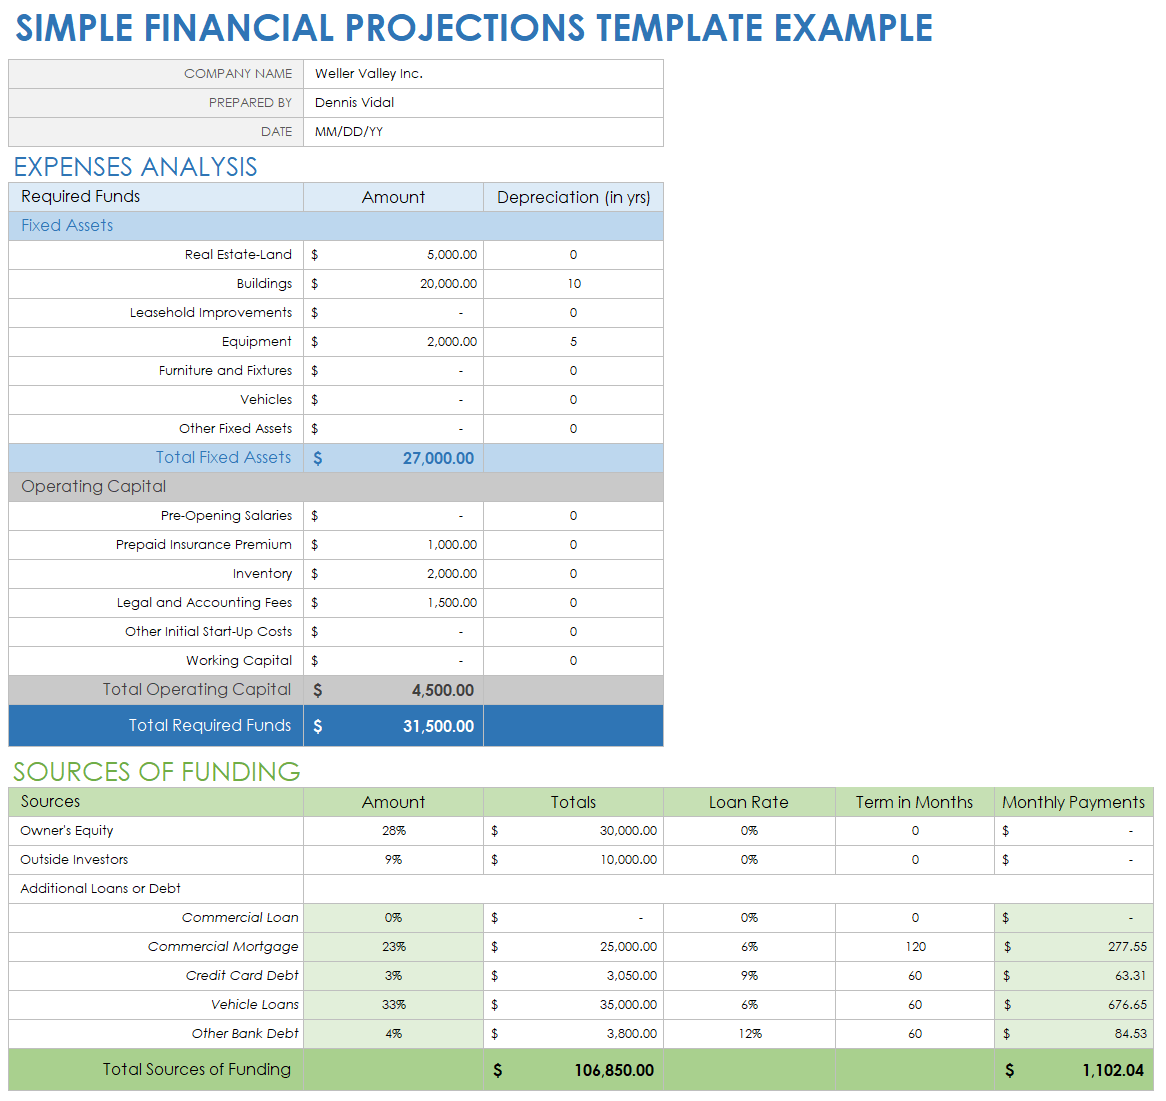 Simple Financial Projection Example Template